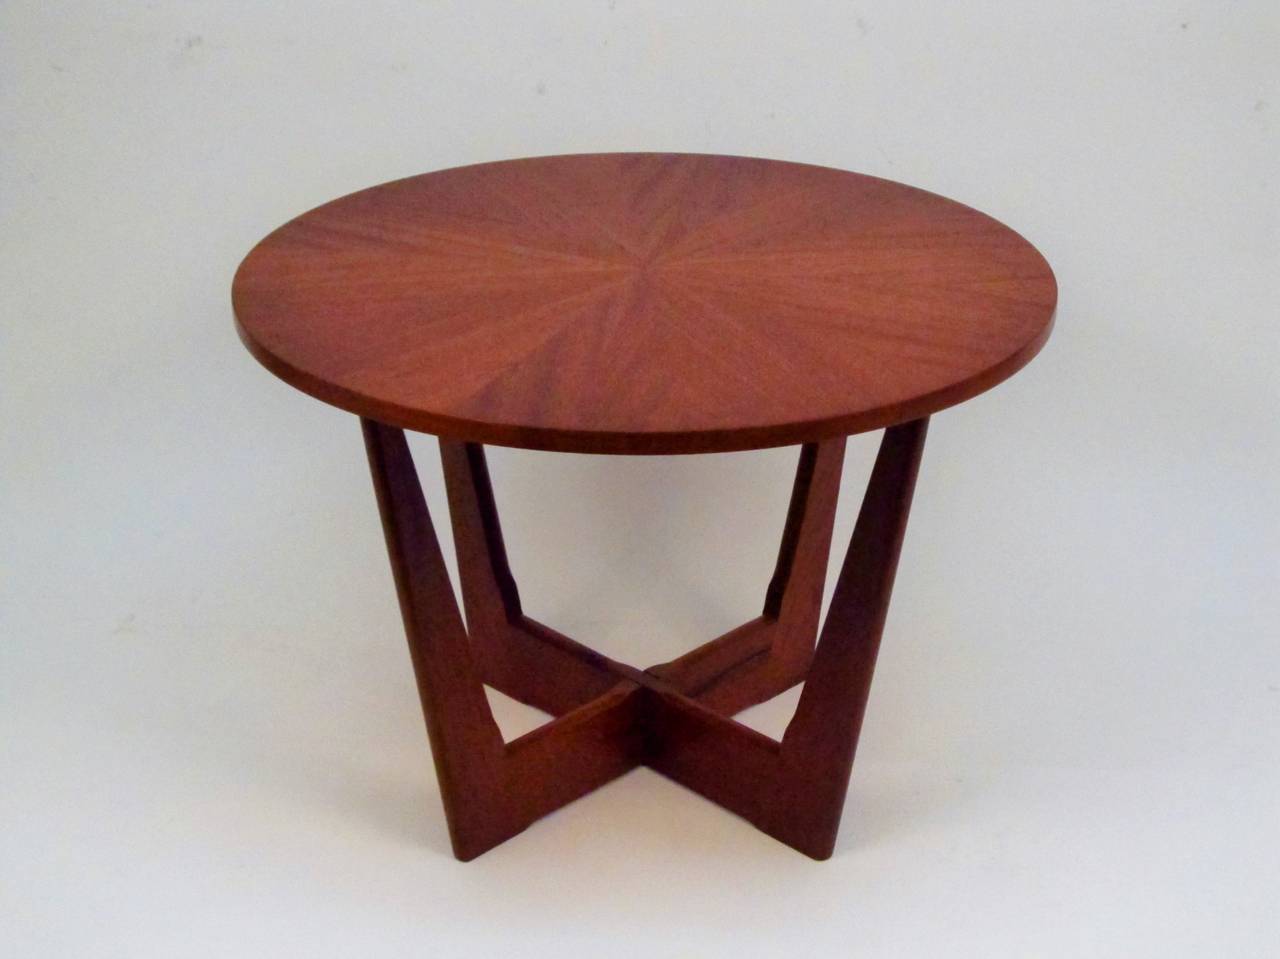 This little gem can be used either as an end or lamp table or a coffee table. A simple but beautiful construction, where the X-base pieces interlock, and the base is doweled into the top, using no hardware. Designed by the son of the famous Danish